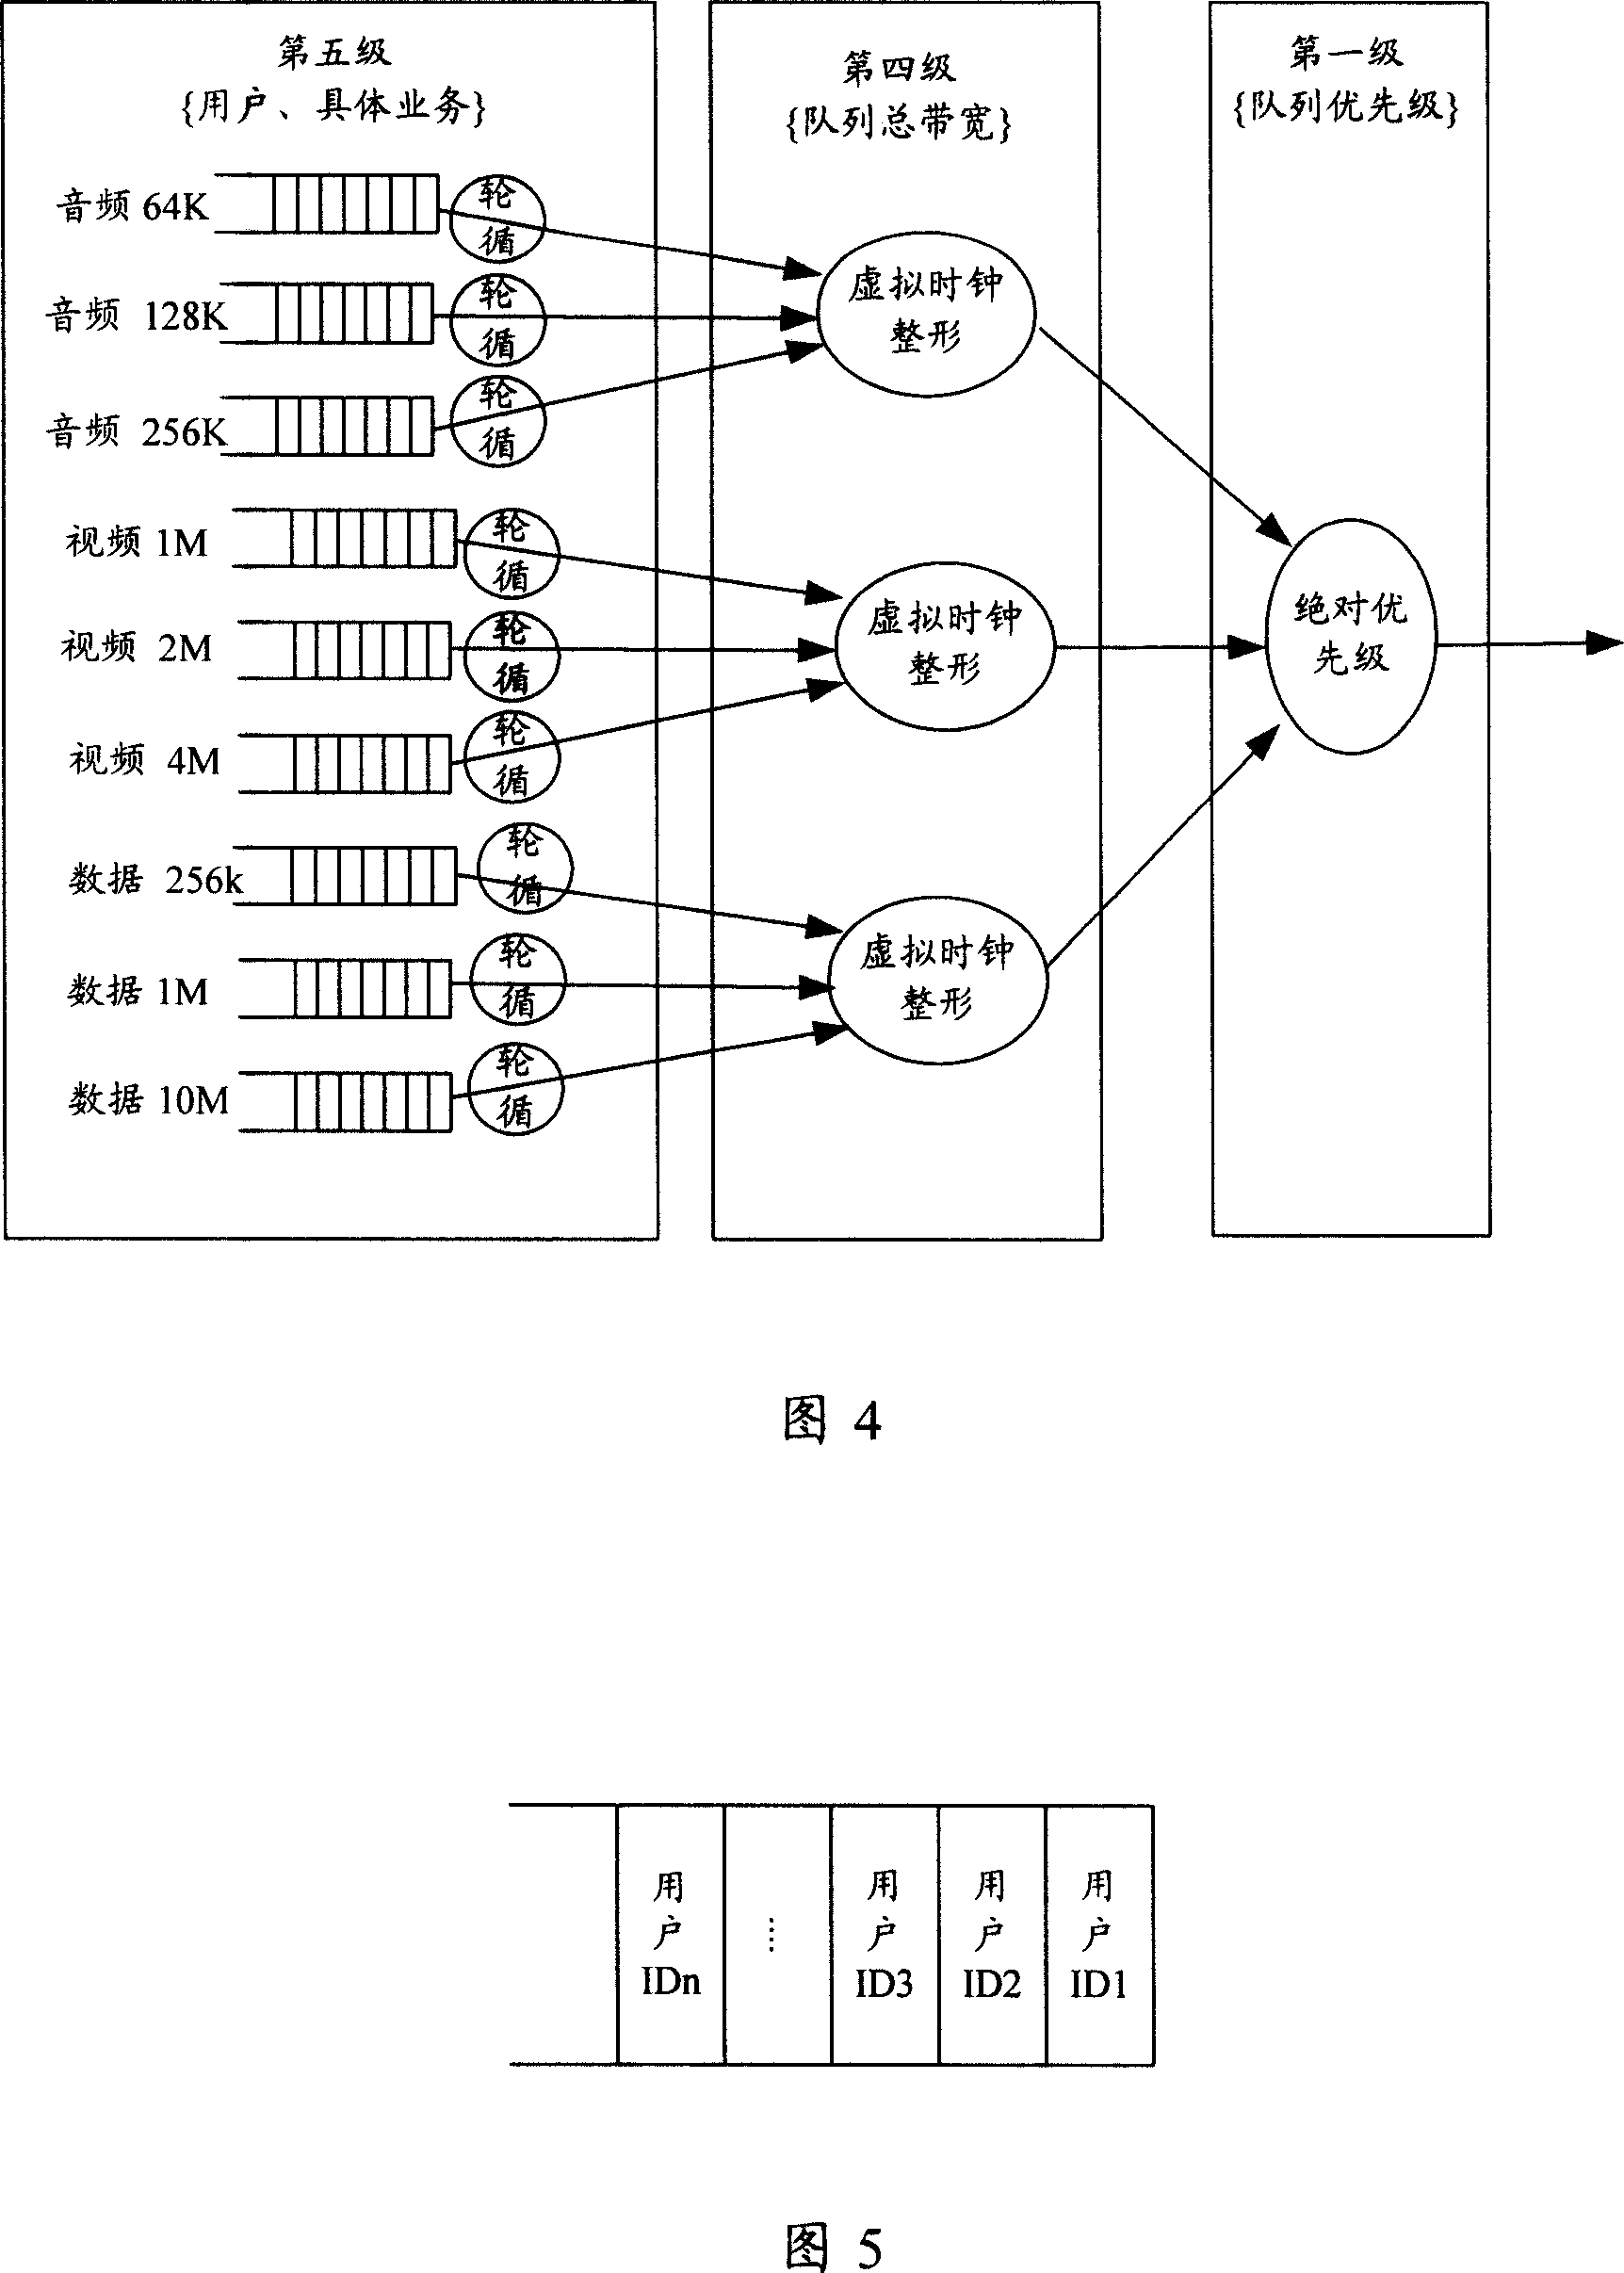 Traffic scheduling method and device